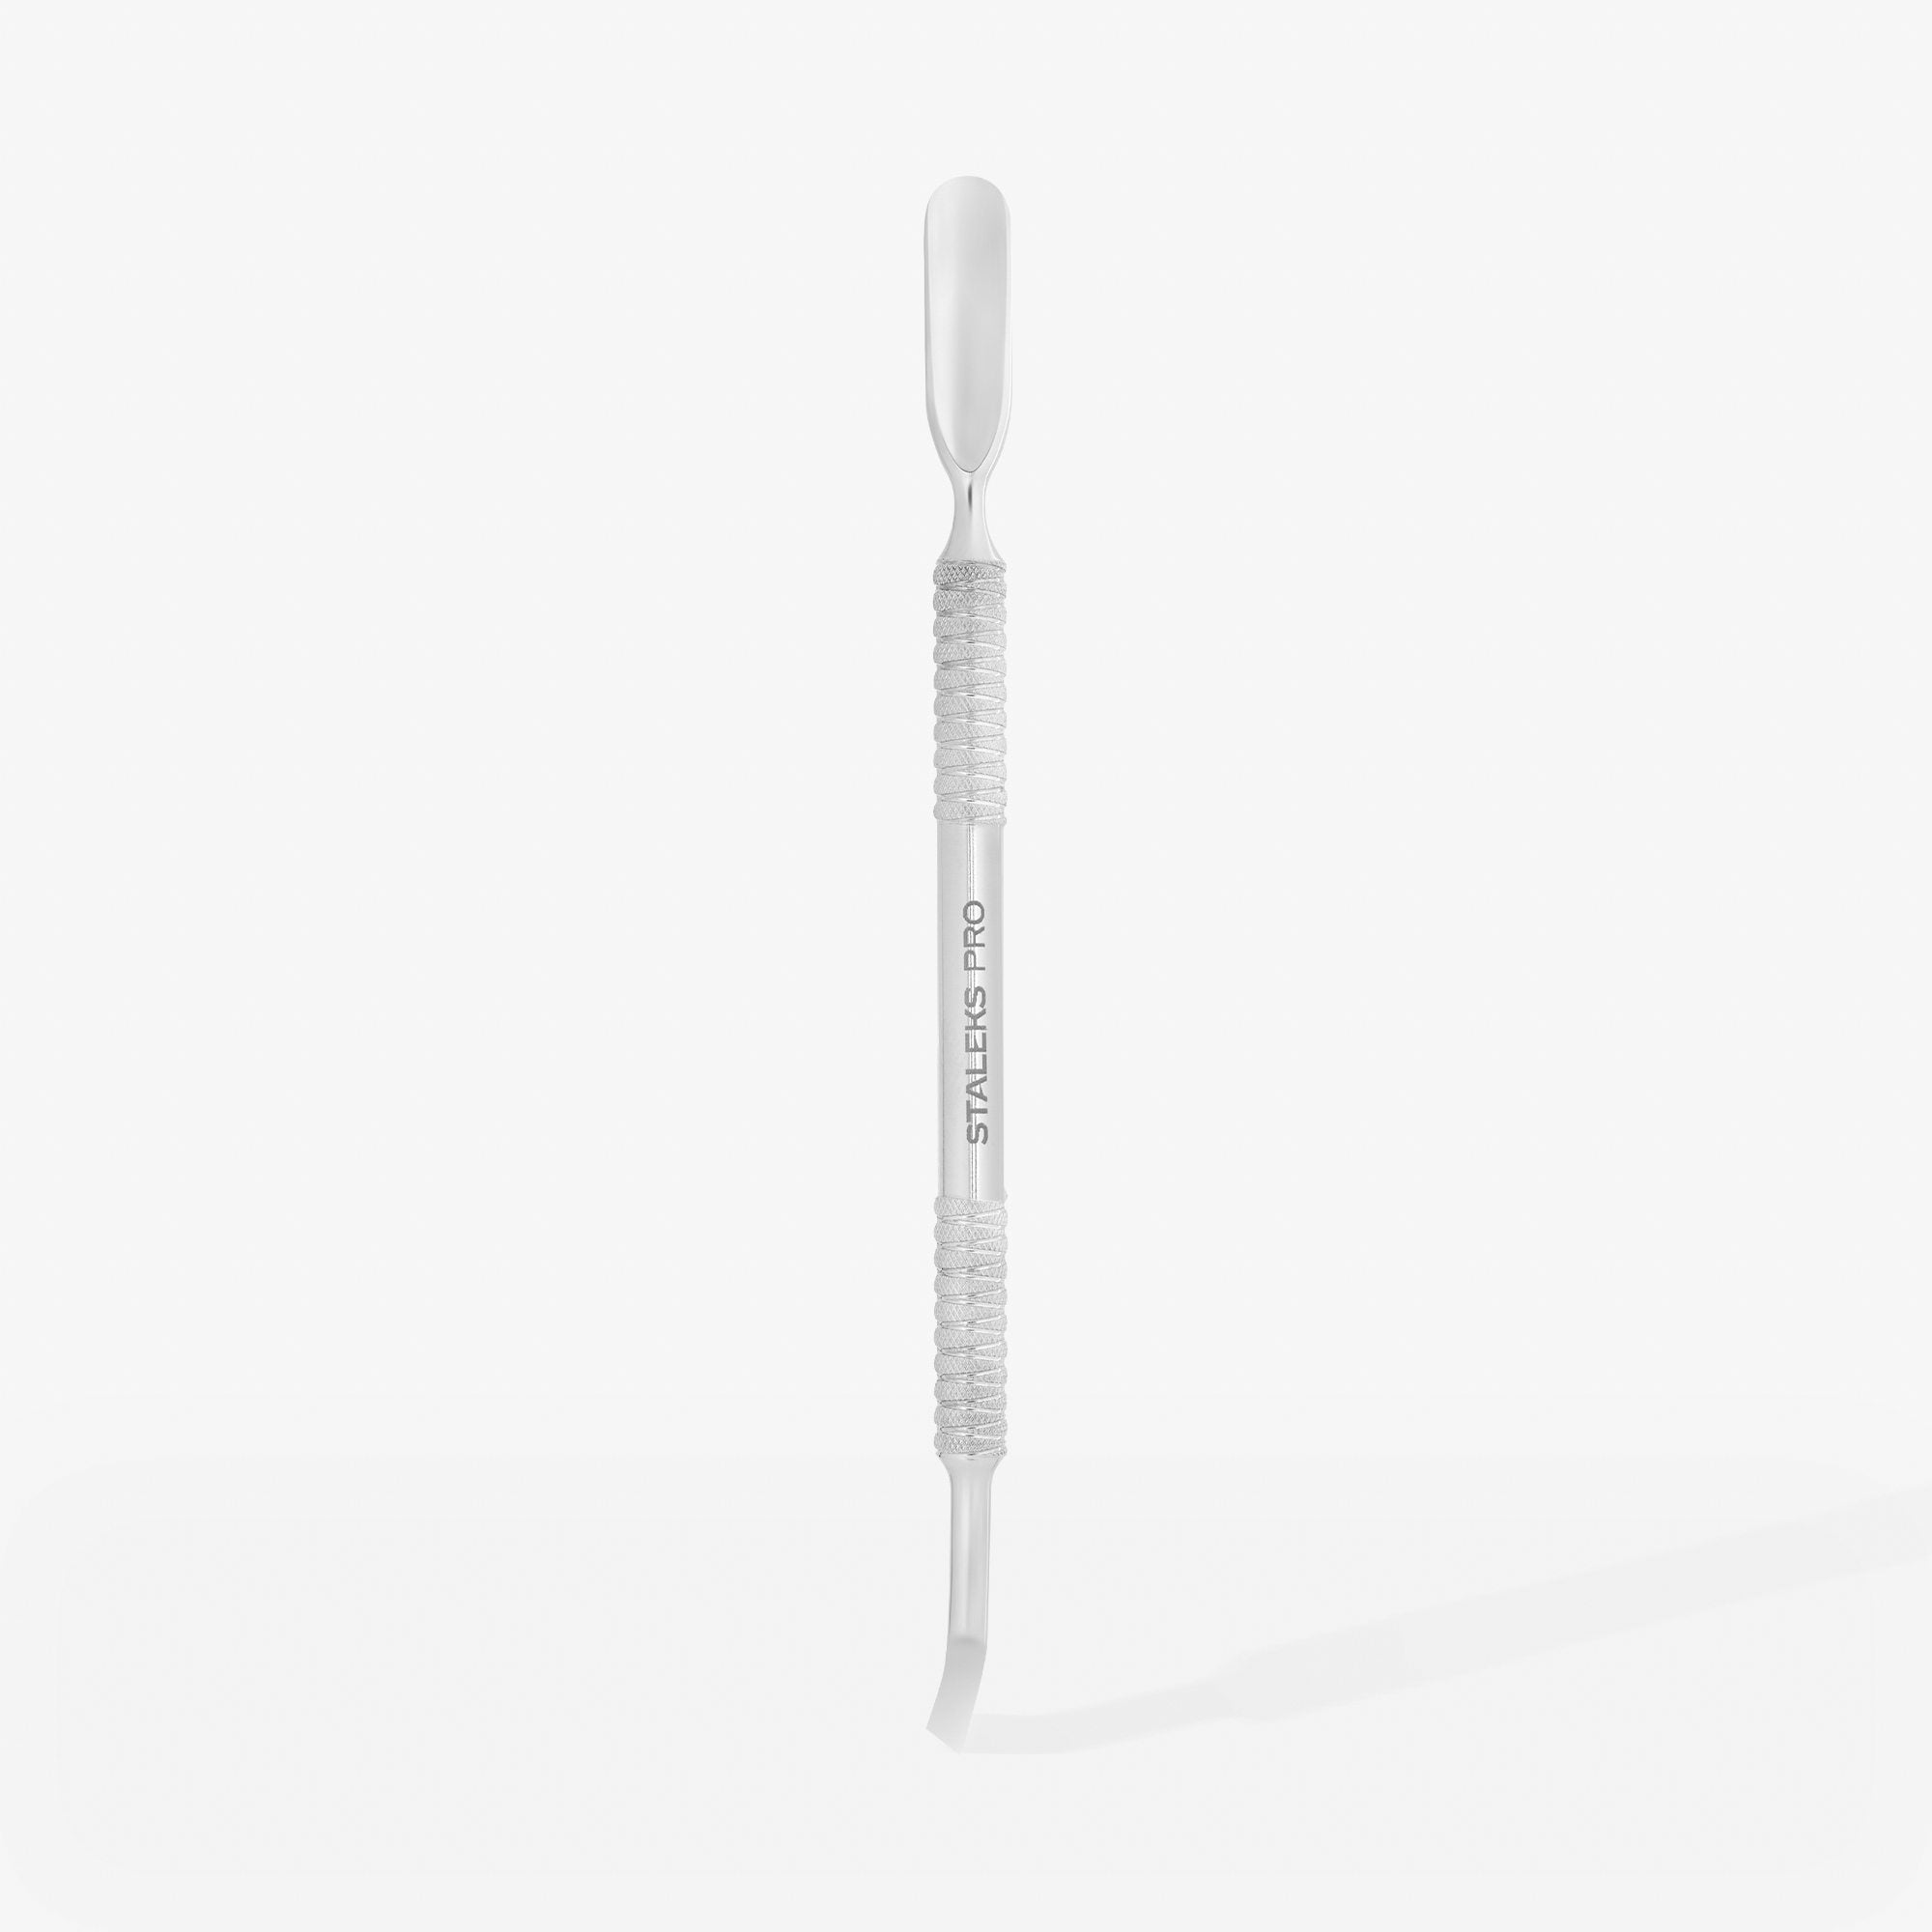 Staleks Pro Cuticle Pusher - Rounded for Lefties